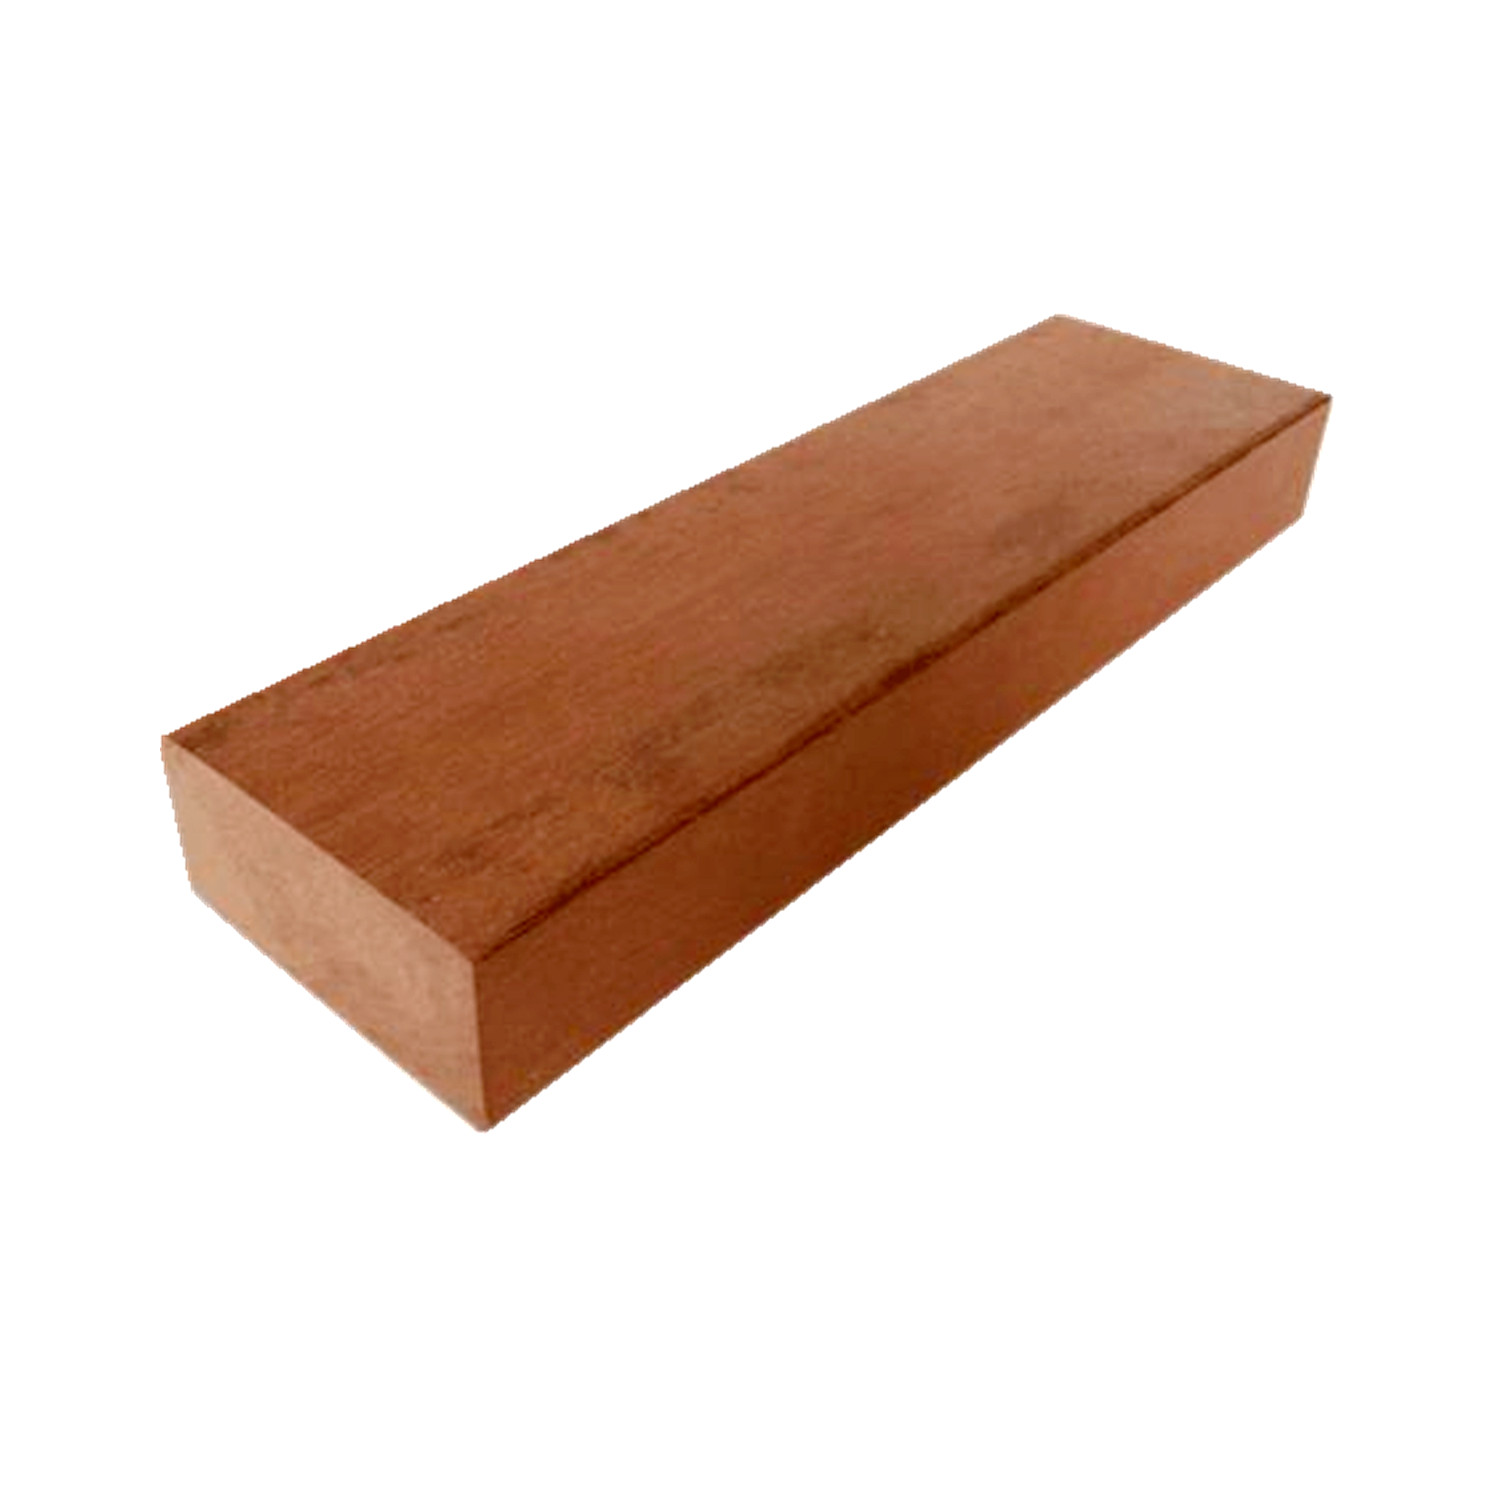  Exterior Anti-uv Wood Plastic Co extrusion Decorative Corner for wall panel is Outdoor Composite wpc decking floor L edge cover